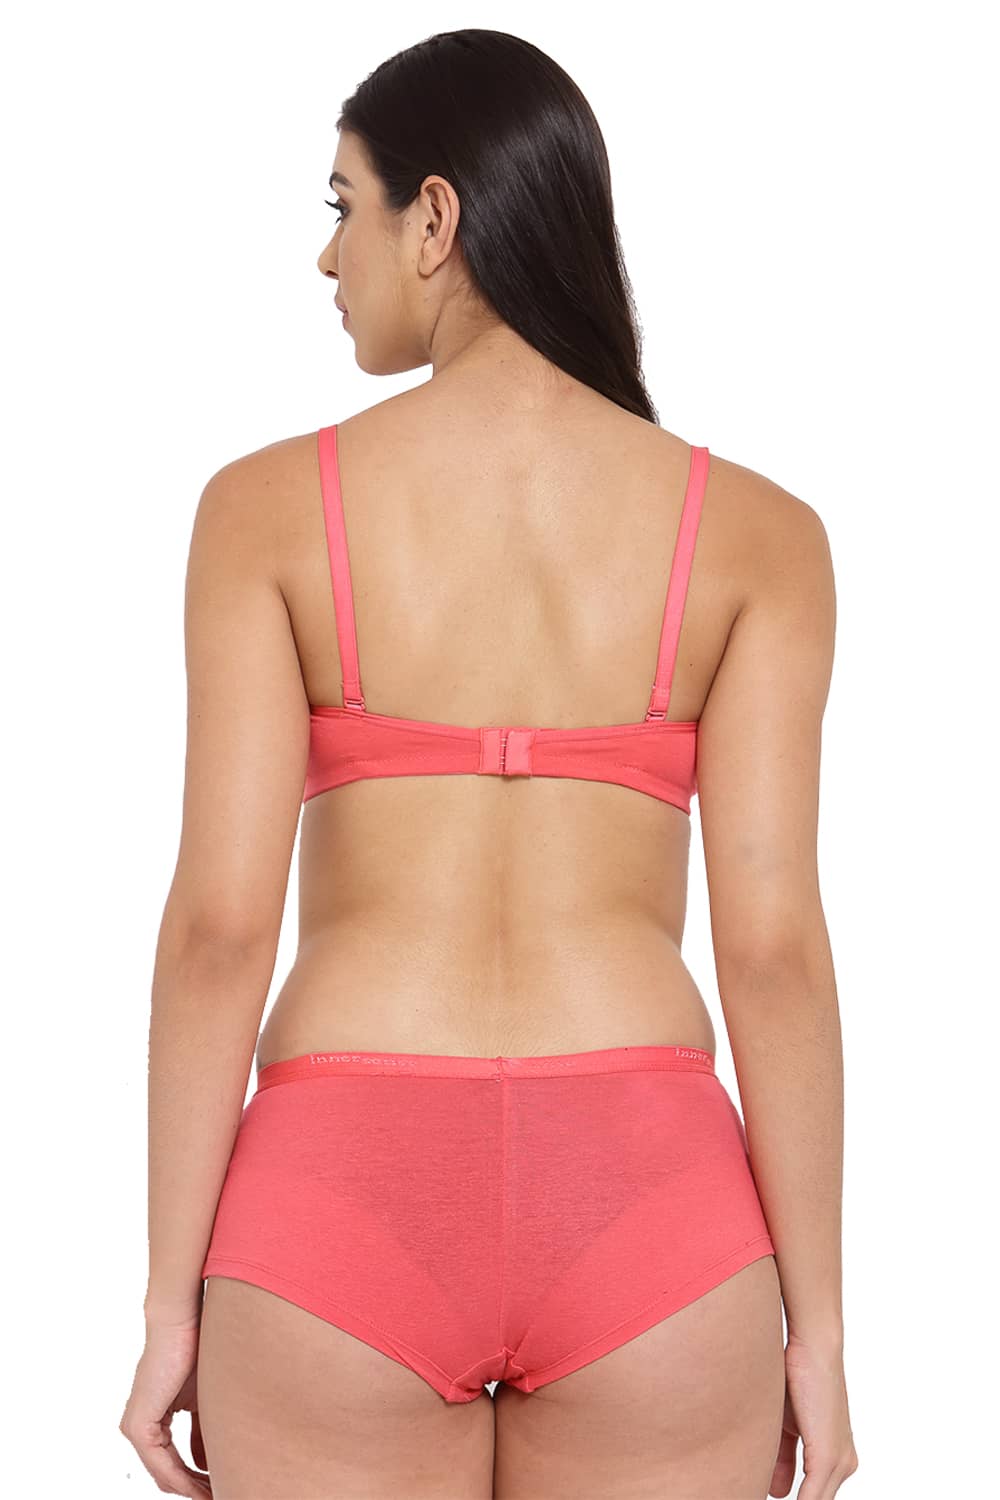 Buy online Pink Cotton Bras And Panty Set from lingerie for Women